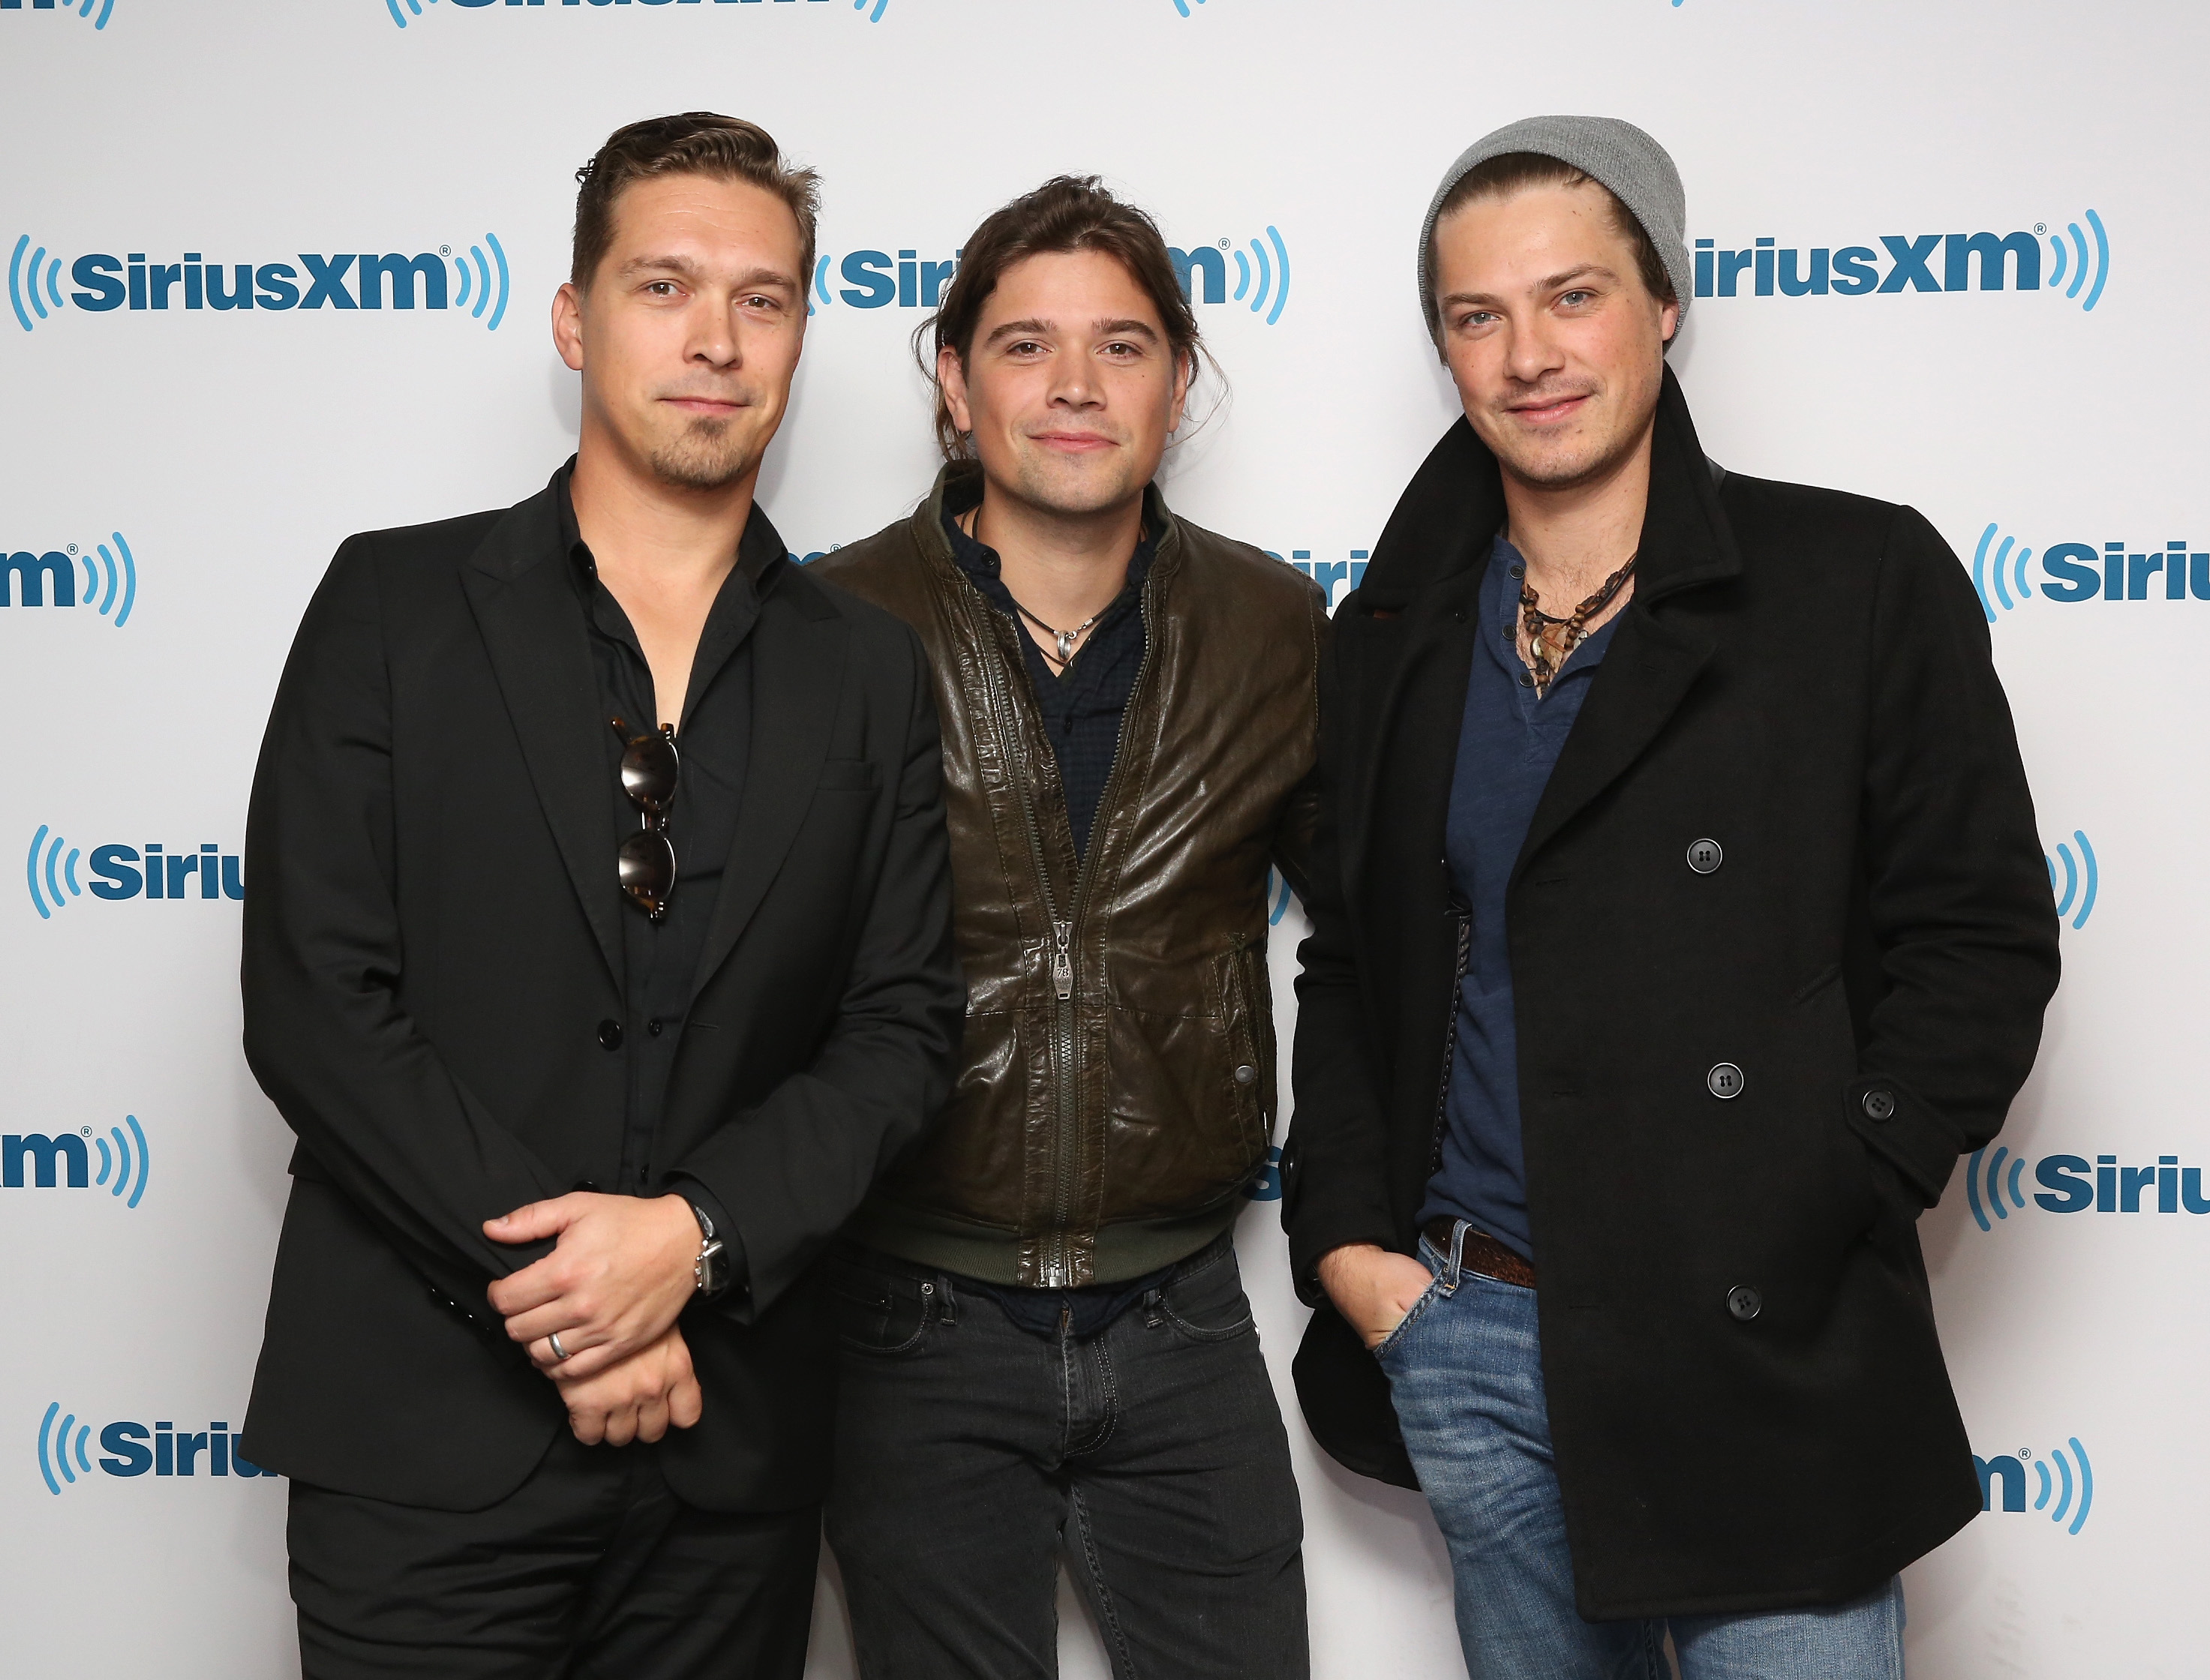 Isaac Hanson, Zac Hanson and Taylor Hanson of Hanson visit at SiriusXM Studios on October 16, 2015 in New York City. (Robin Marchant/Getty Images)